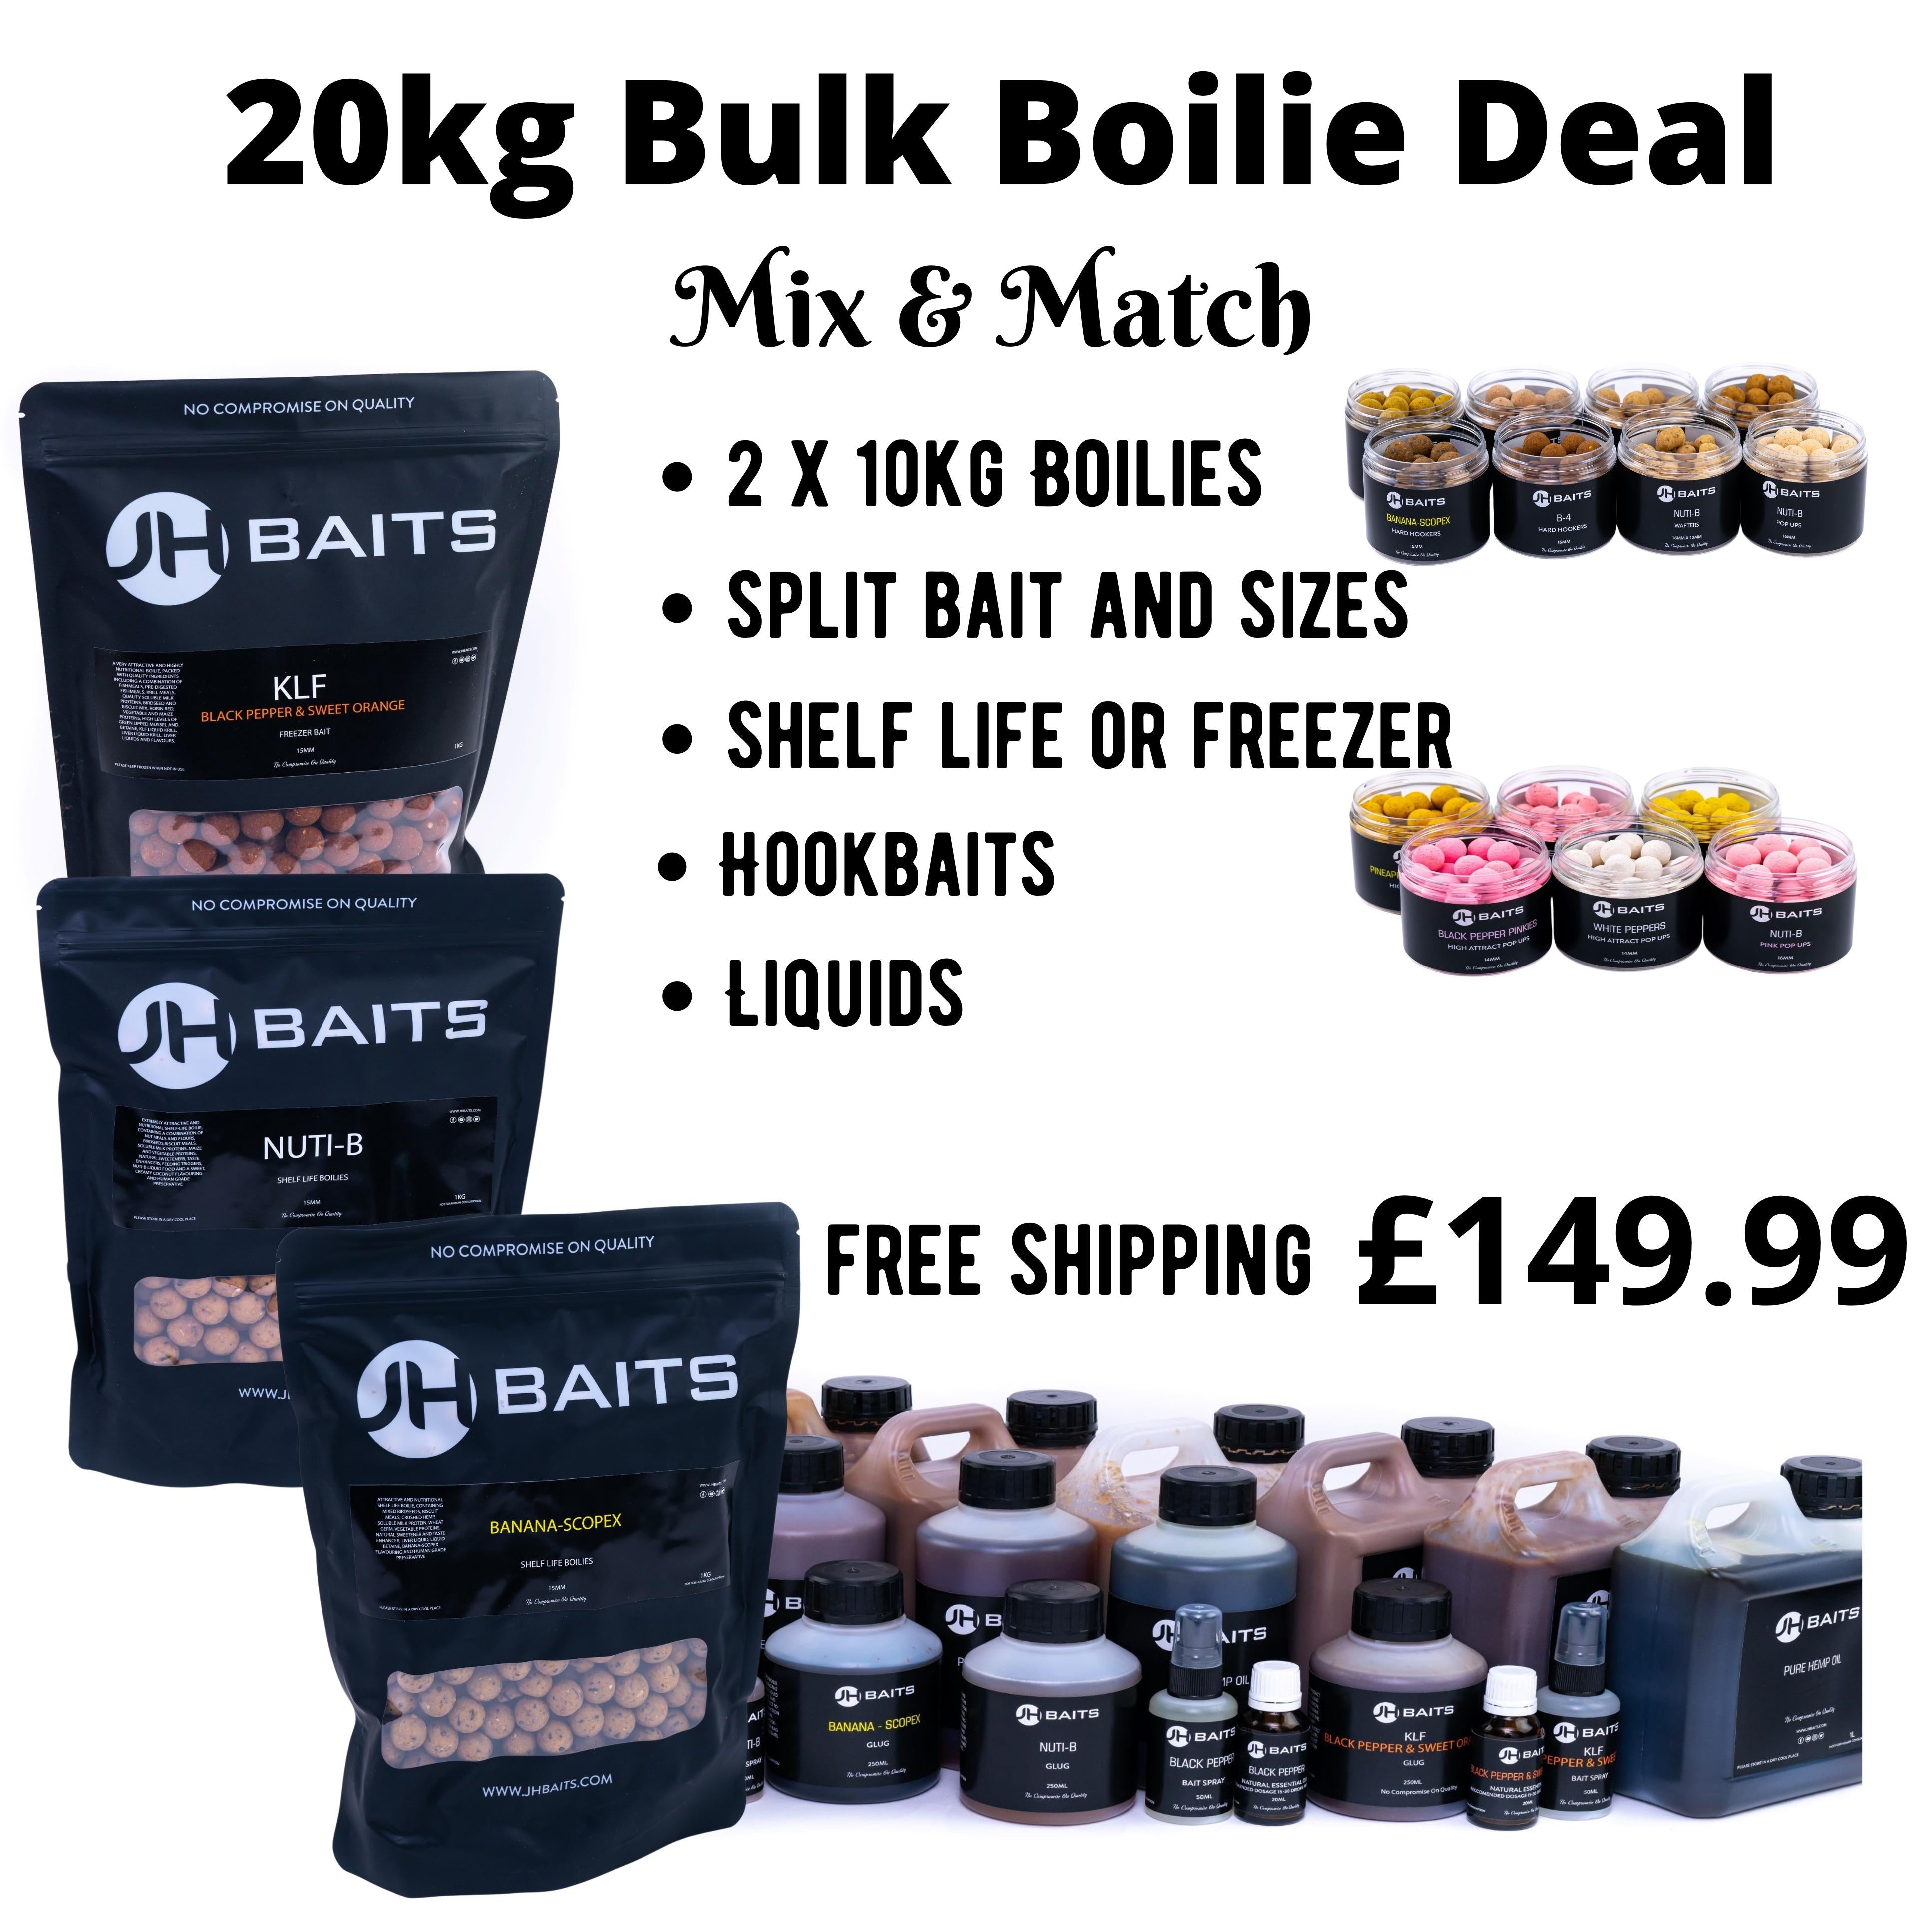 SPECIAL OFFERS – JH Baits